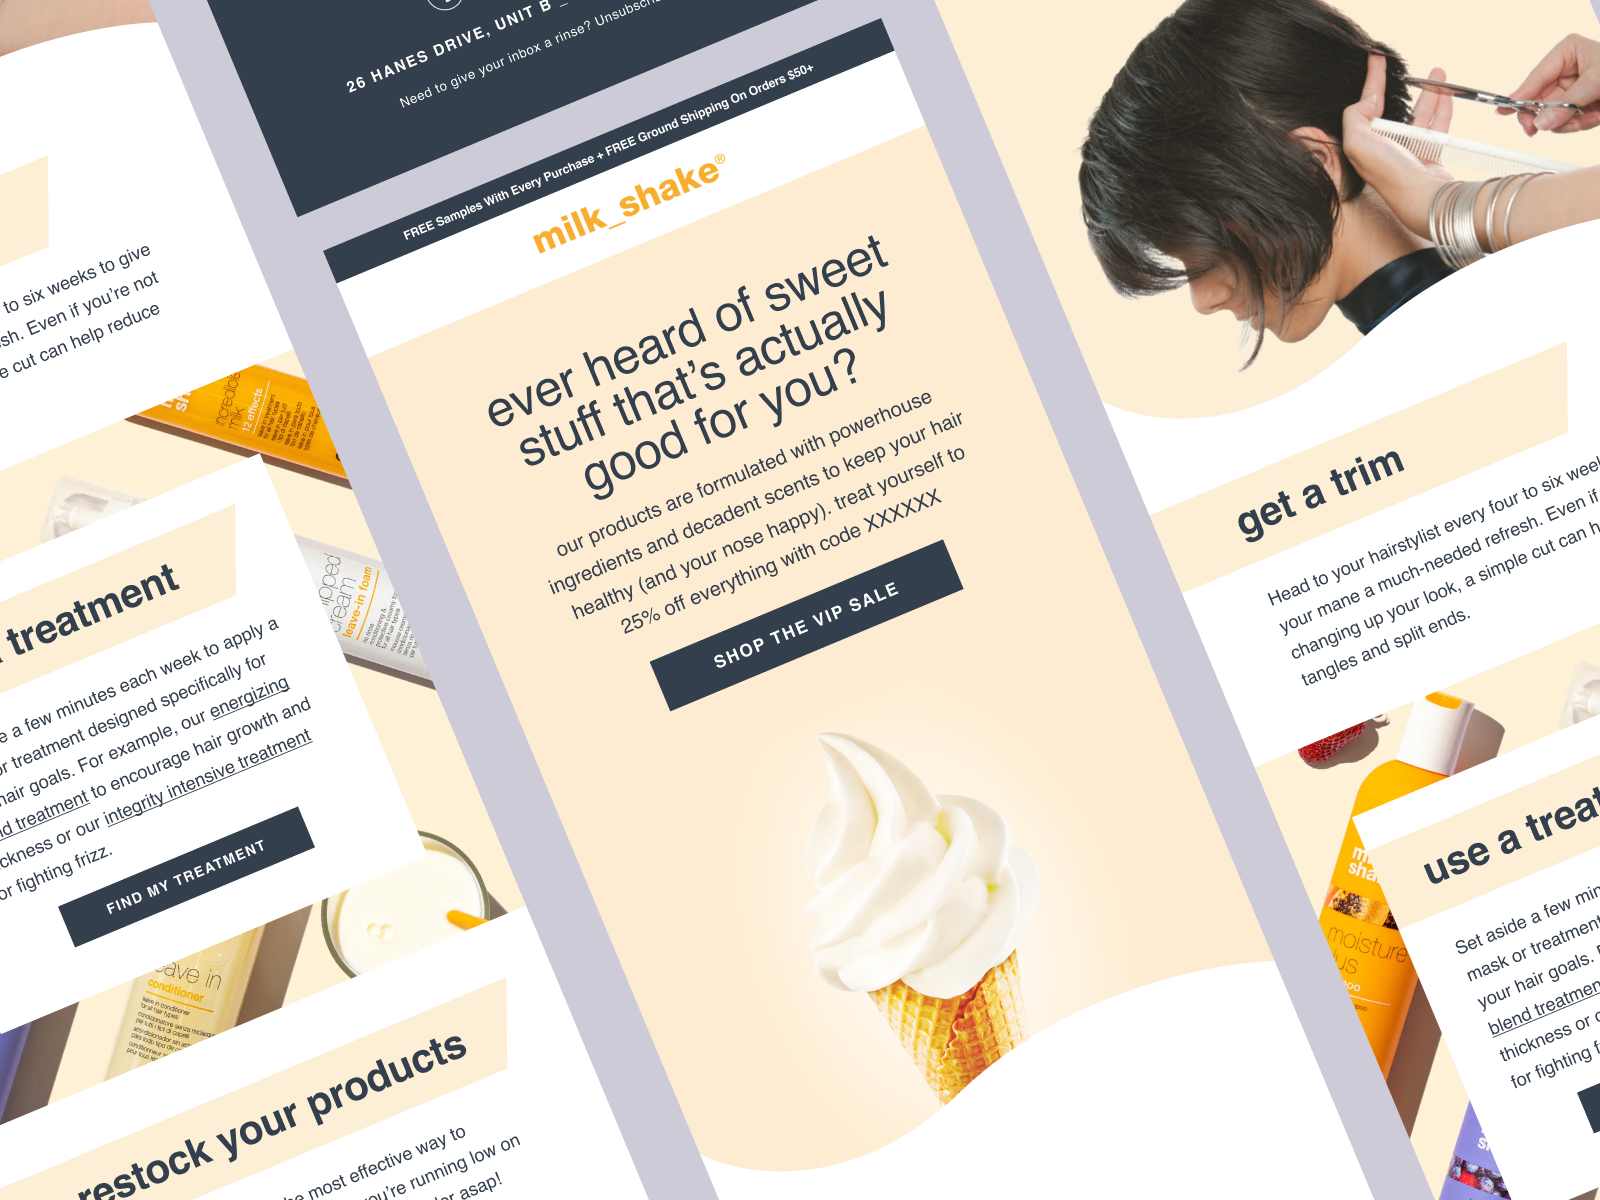 Screenshots of email campaigns from Milkshake